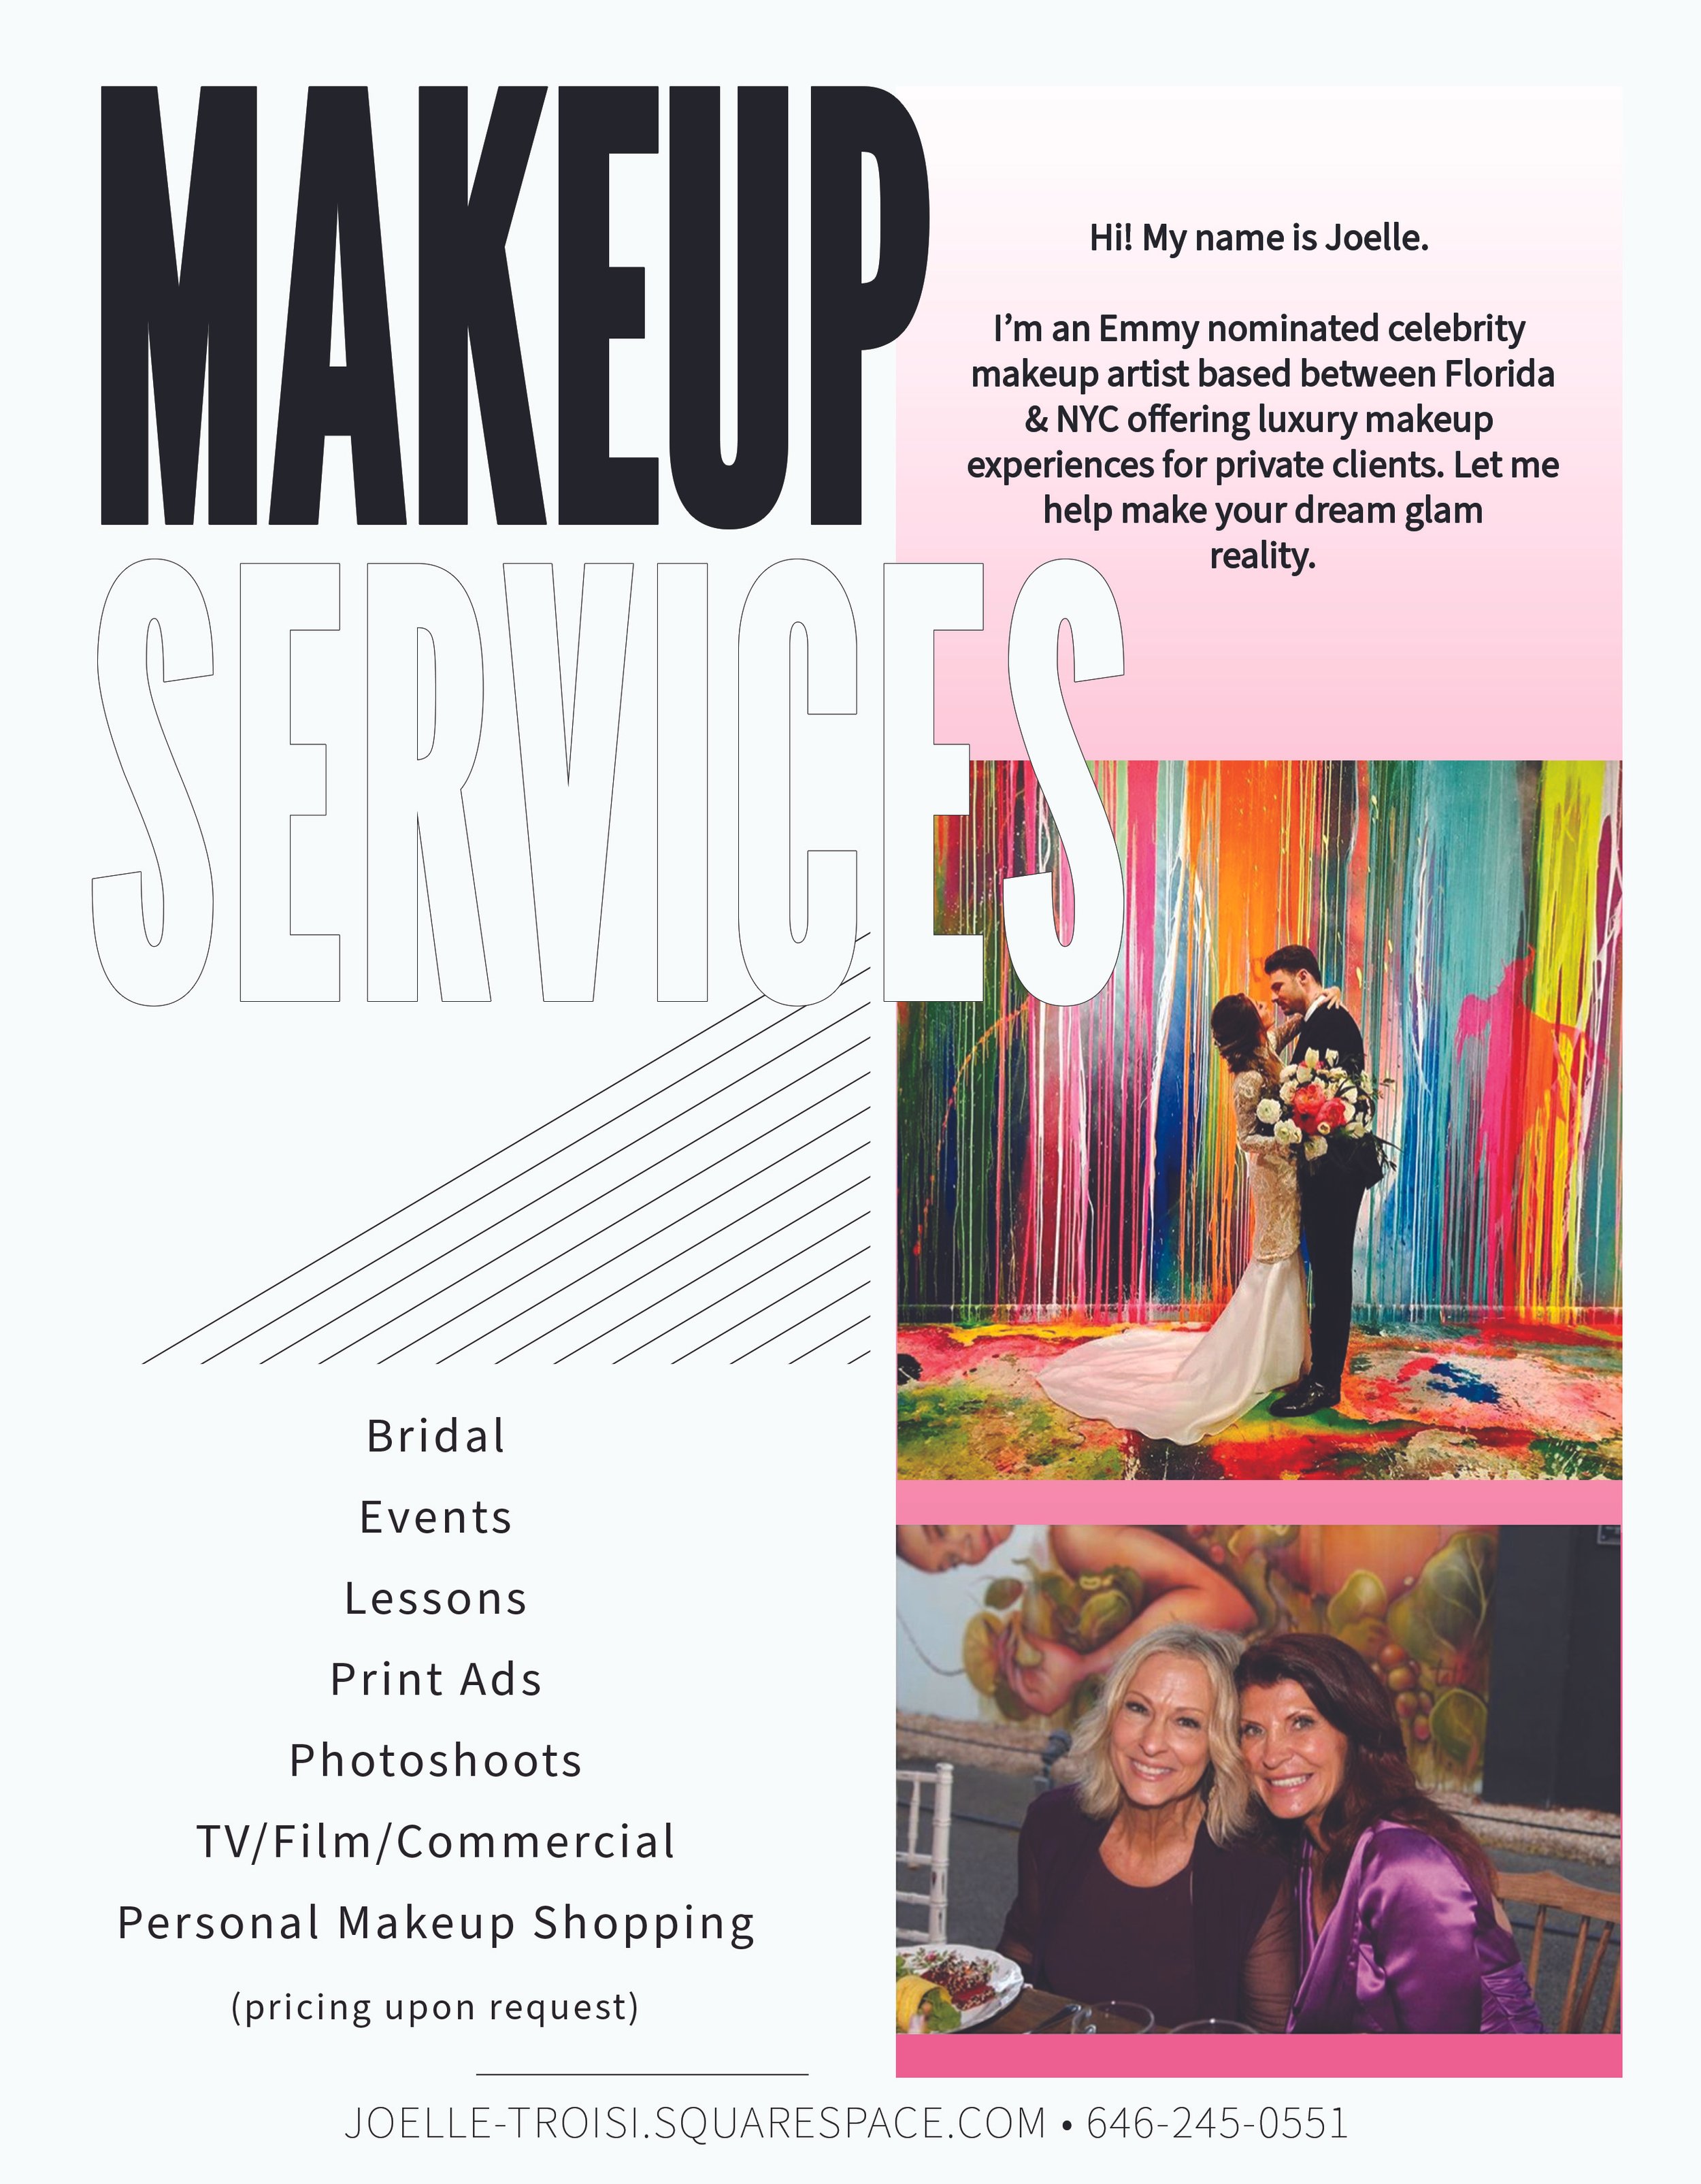 Makeup Services for private clients